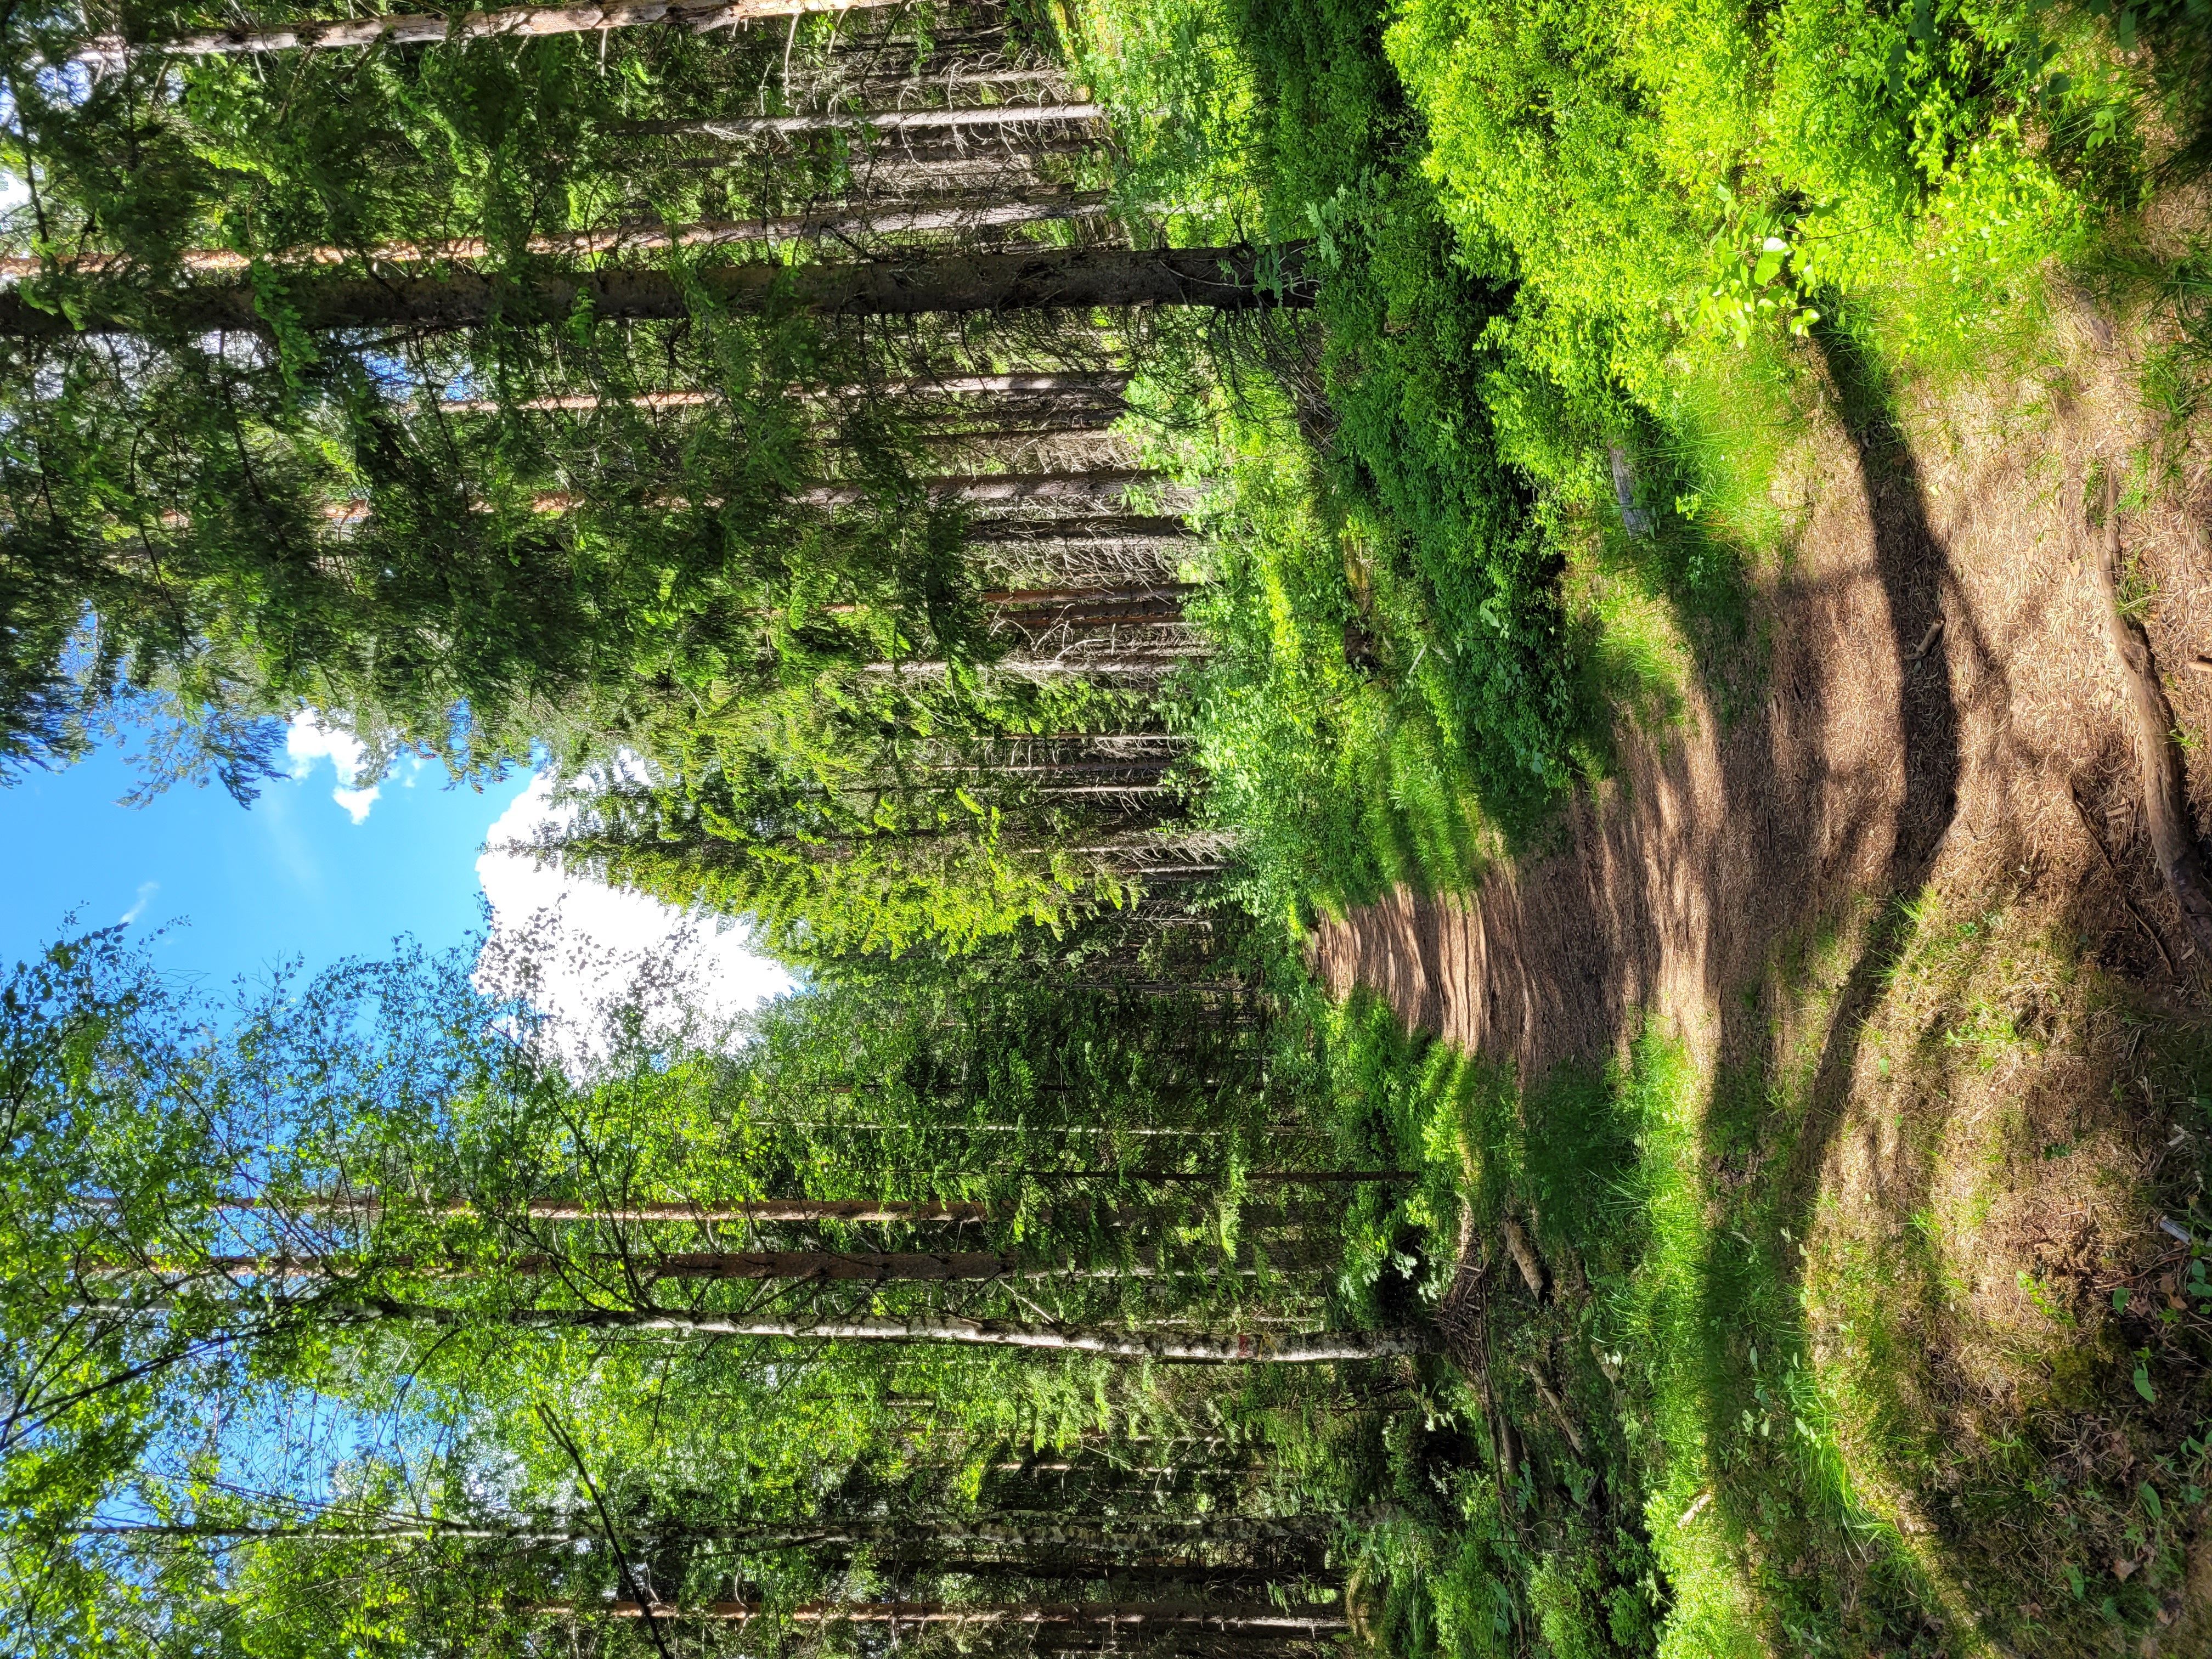 Kummakivi trail on in the forest